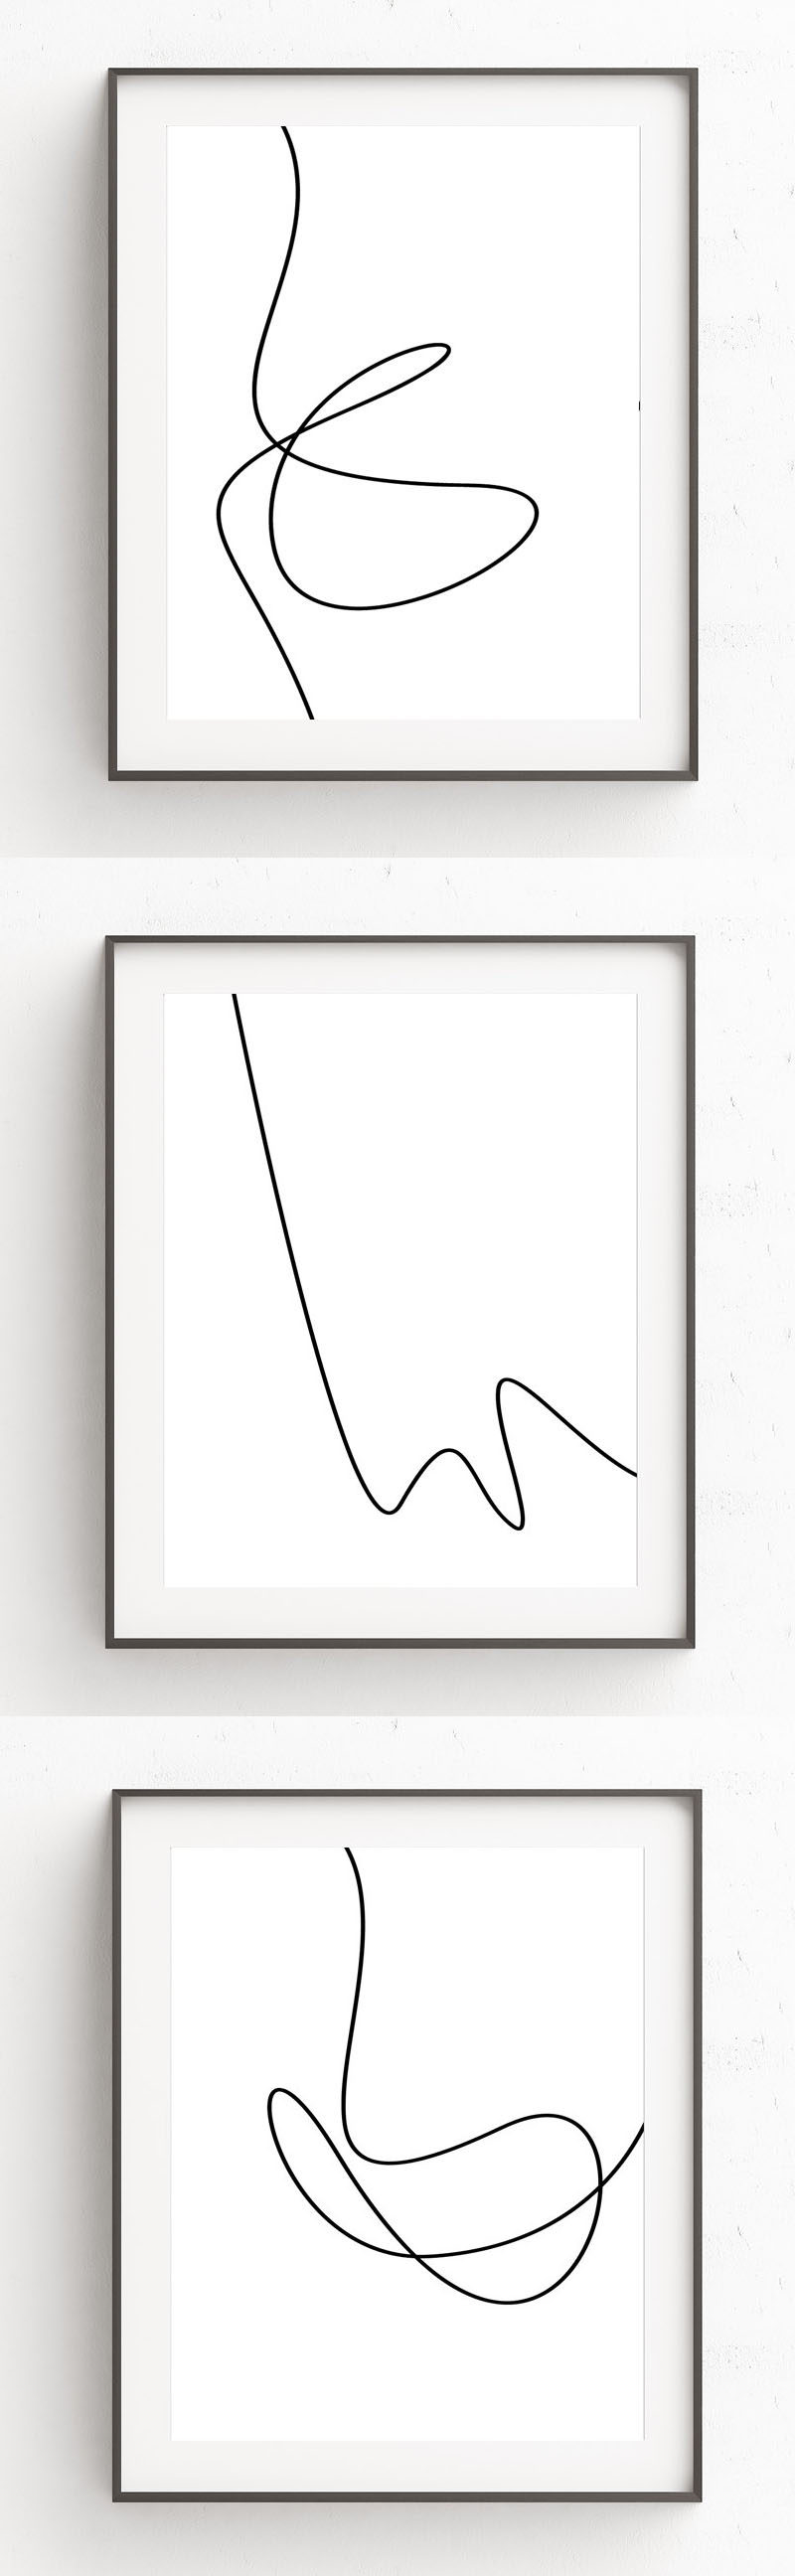 Minimalist Line Art Prints Are A Simple Way To Decorate